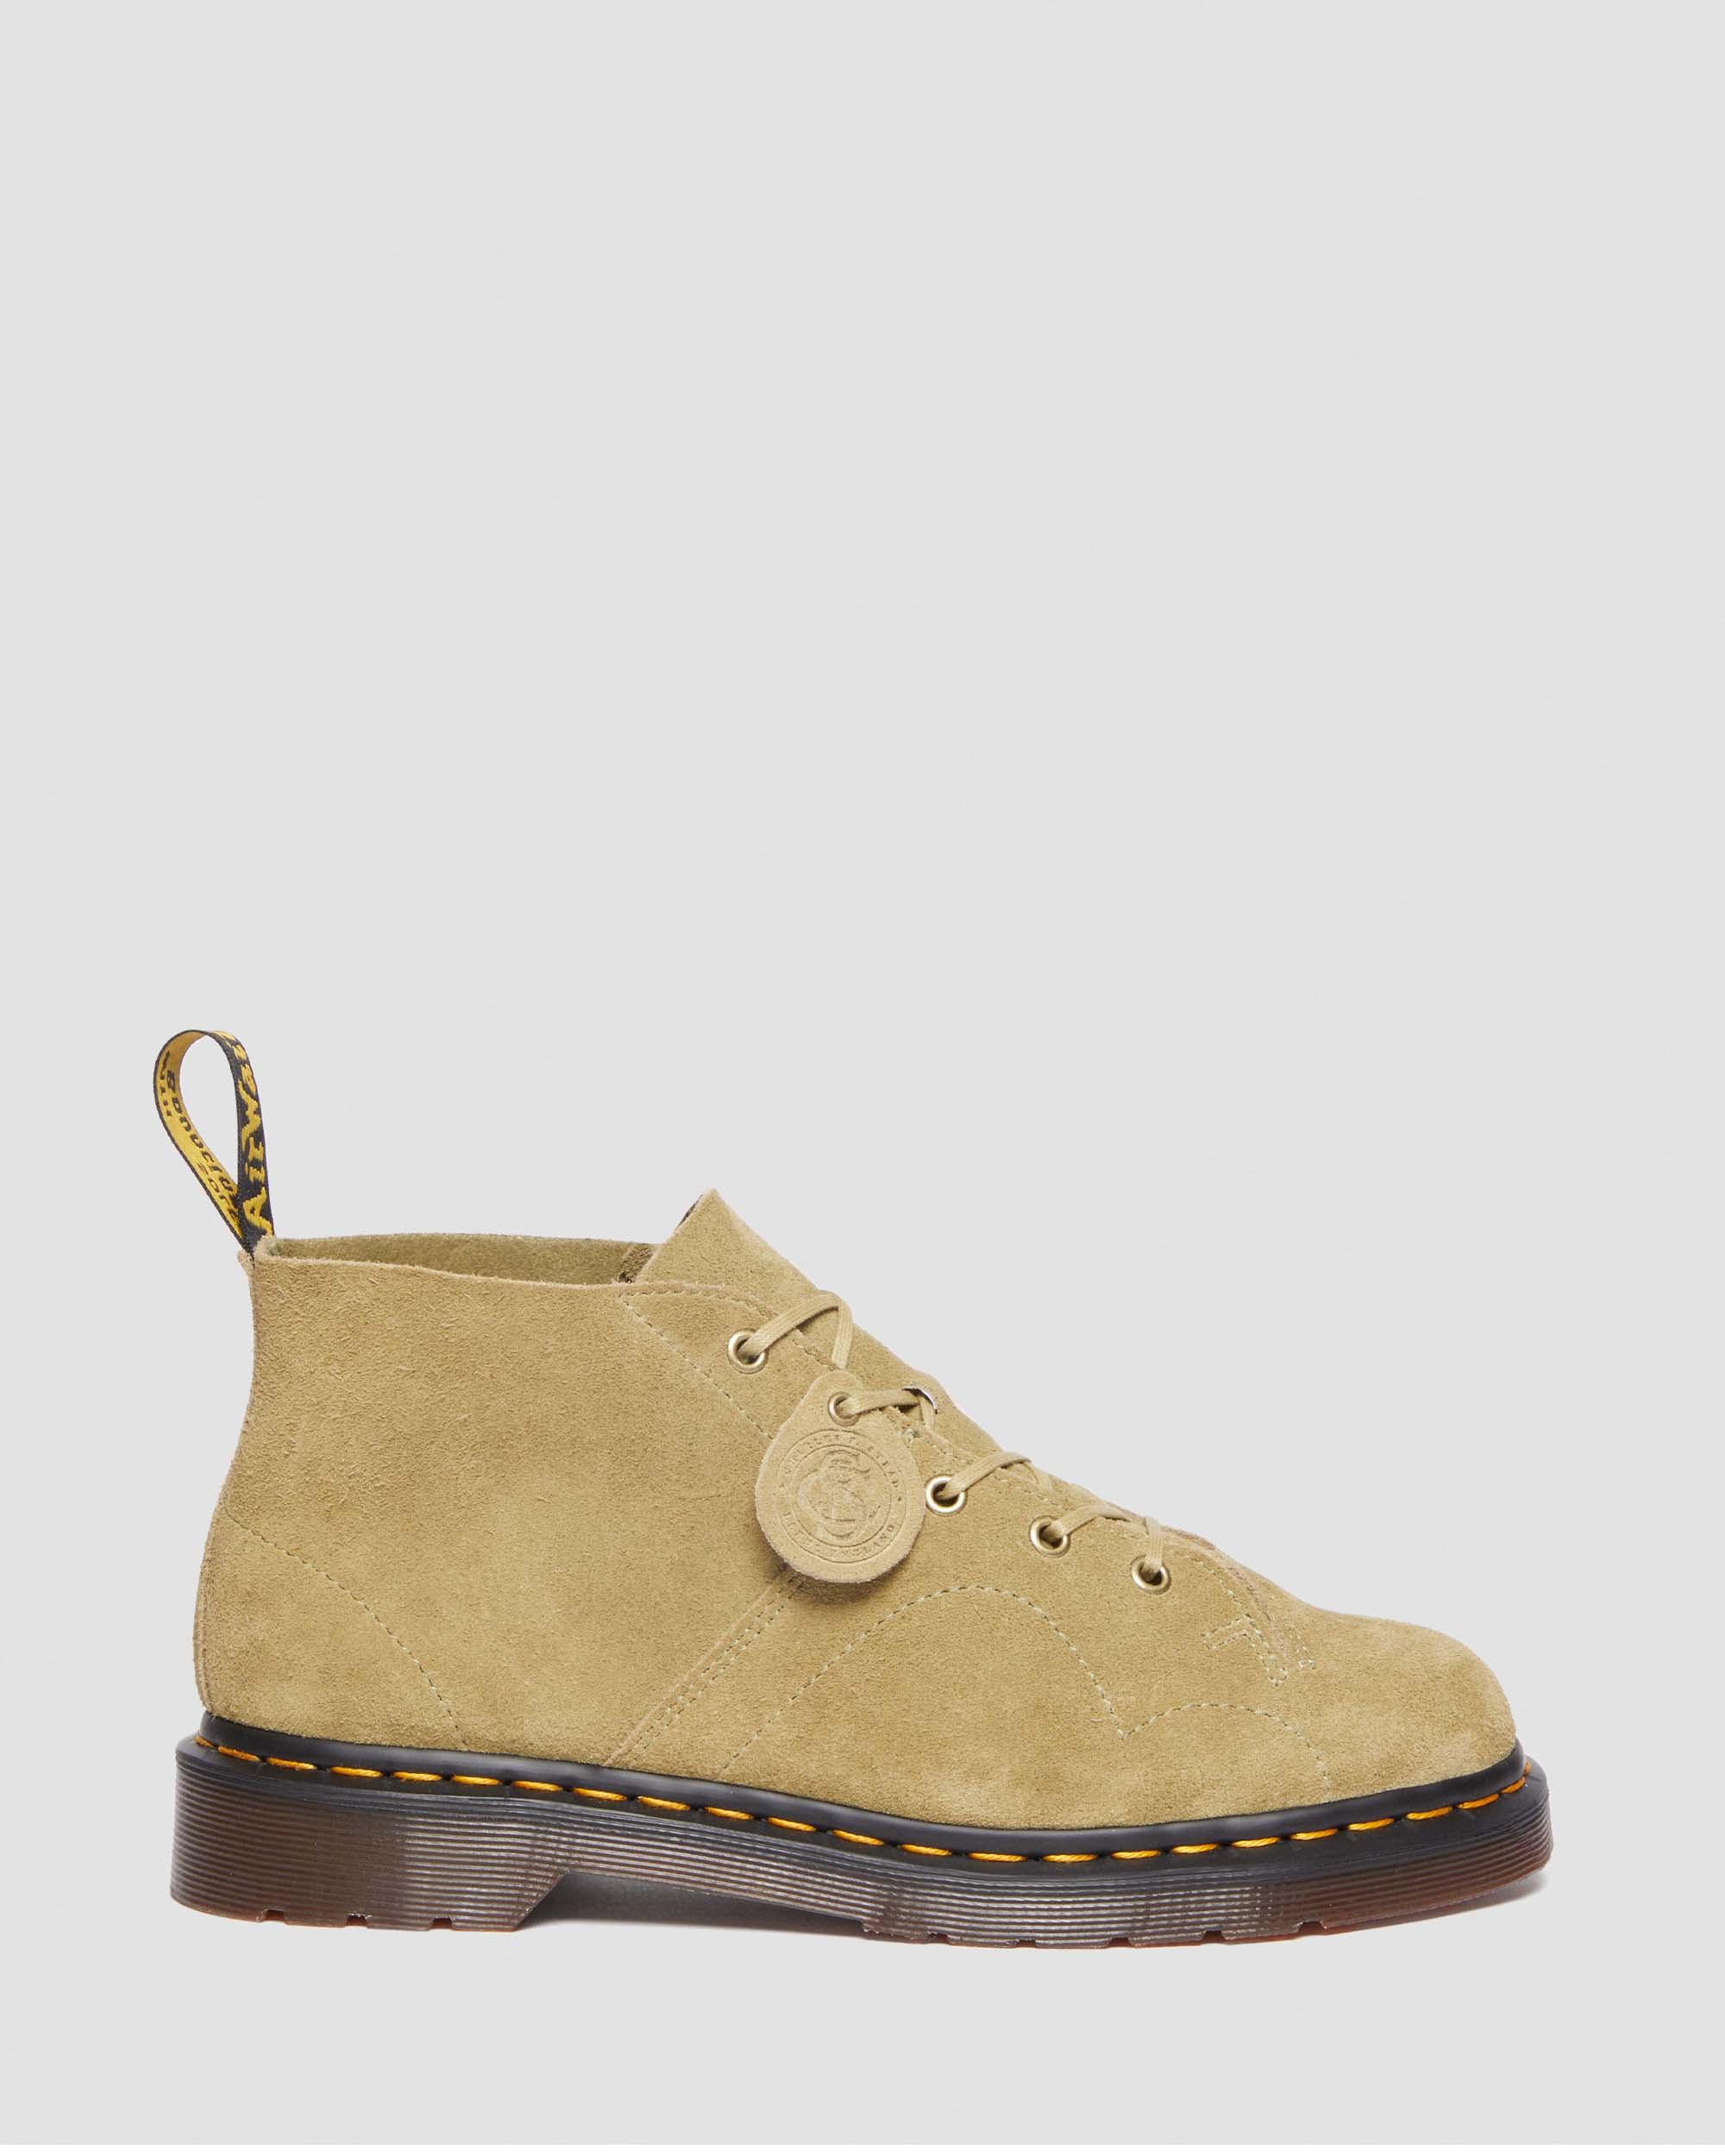 Church Desert Oasis Suede Monkey Boots in Pale Olive